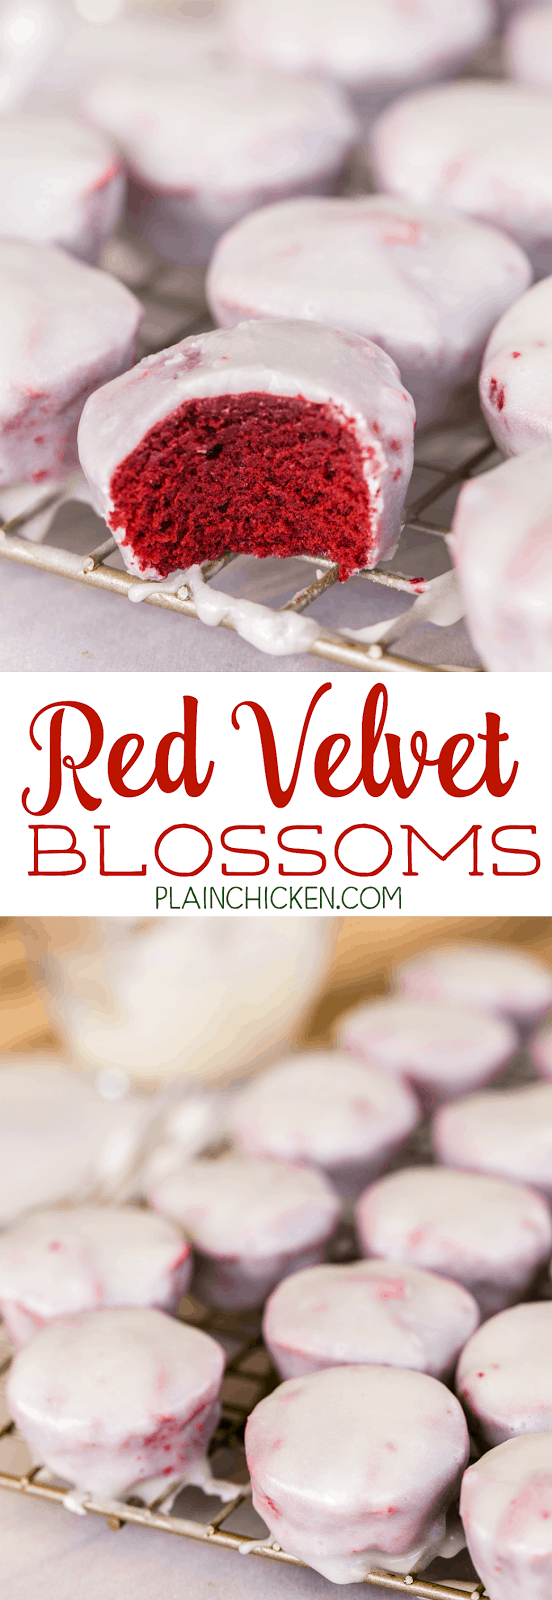 Red Velvet Blossoms - mini red velvet cakes dunked in a homemade cream cheese glaze. These things are CRAZY good! I ate WAY too many of these cakes. Red Velvet cake mix, chocolate pudding, oil, eggs, cream cheese, milk, powdered sugar. Make 5 dozen - great for holiday parties!